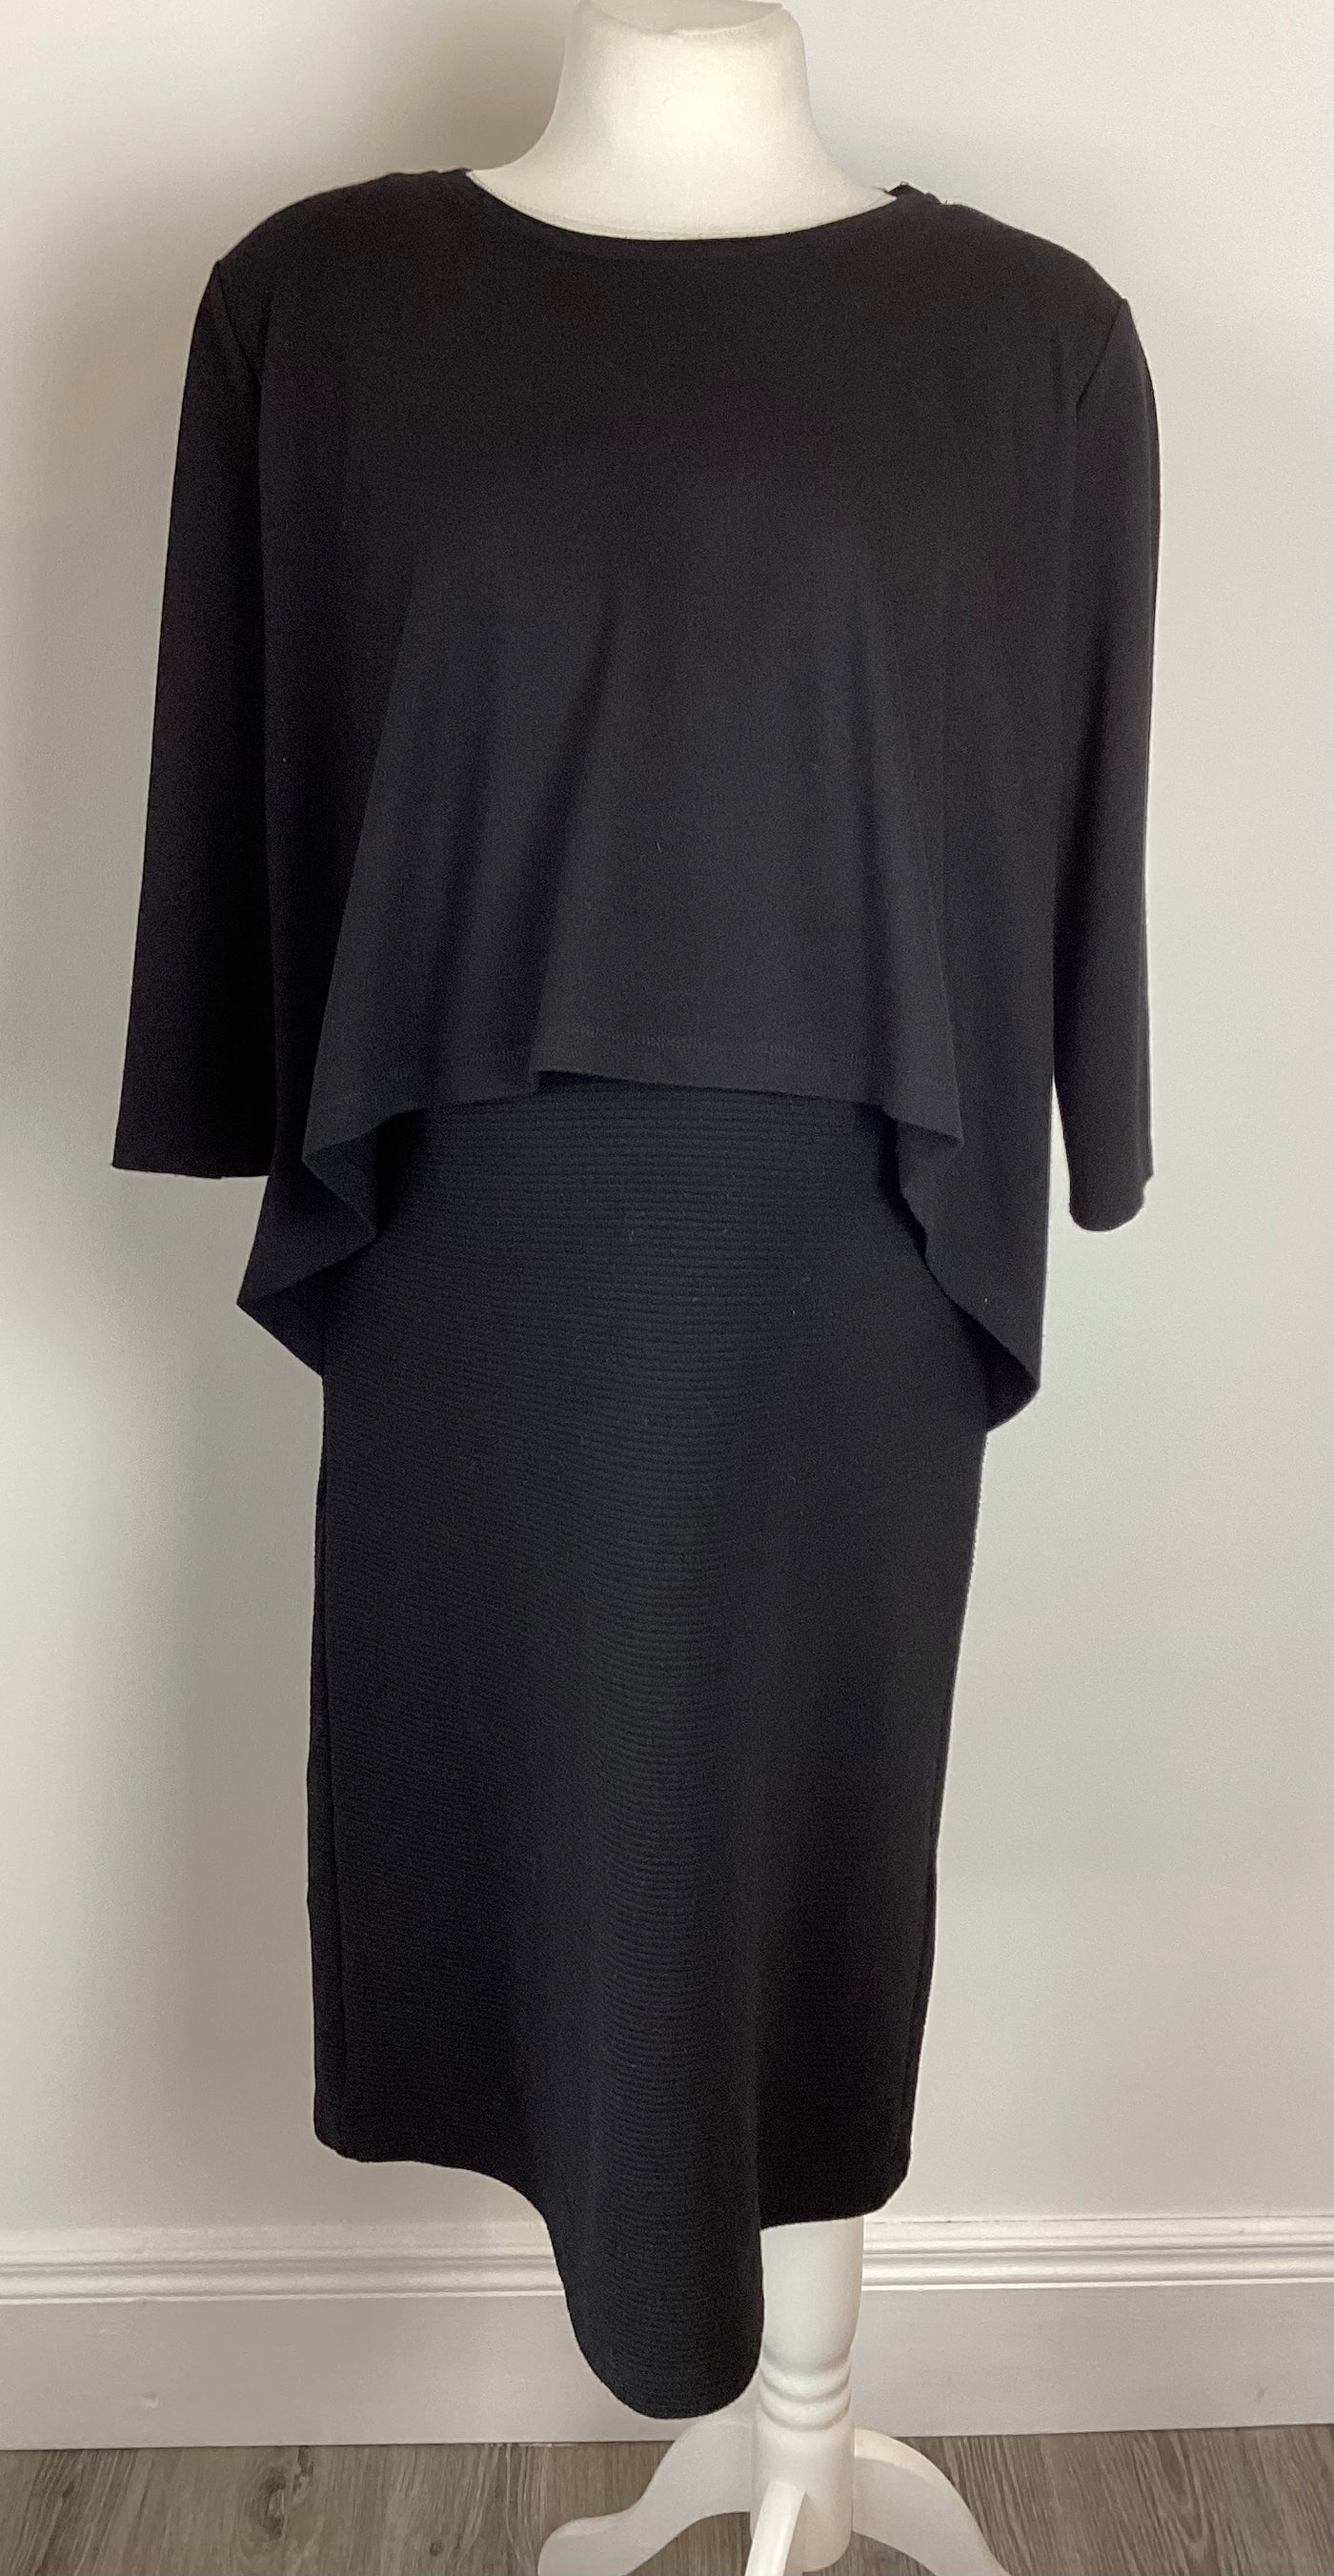 Blooming Marvellous black nursing dress with 3/4 length sleeve - Size 16